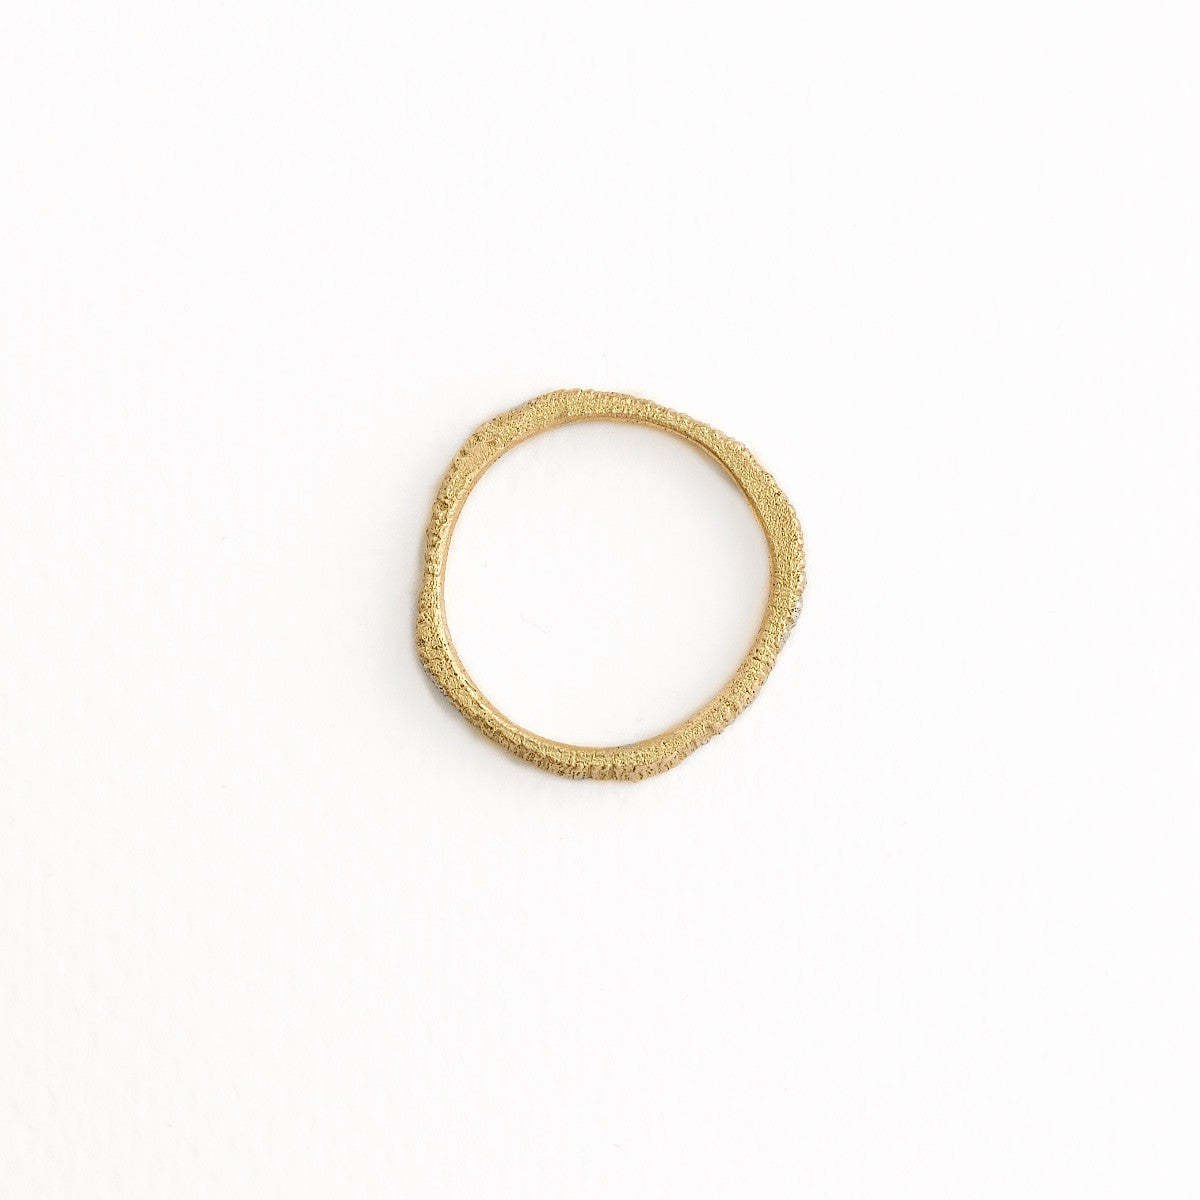 'Woodring No. 1' Fairtrade Gold Ring